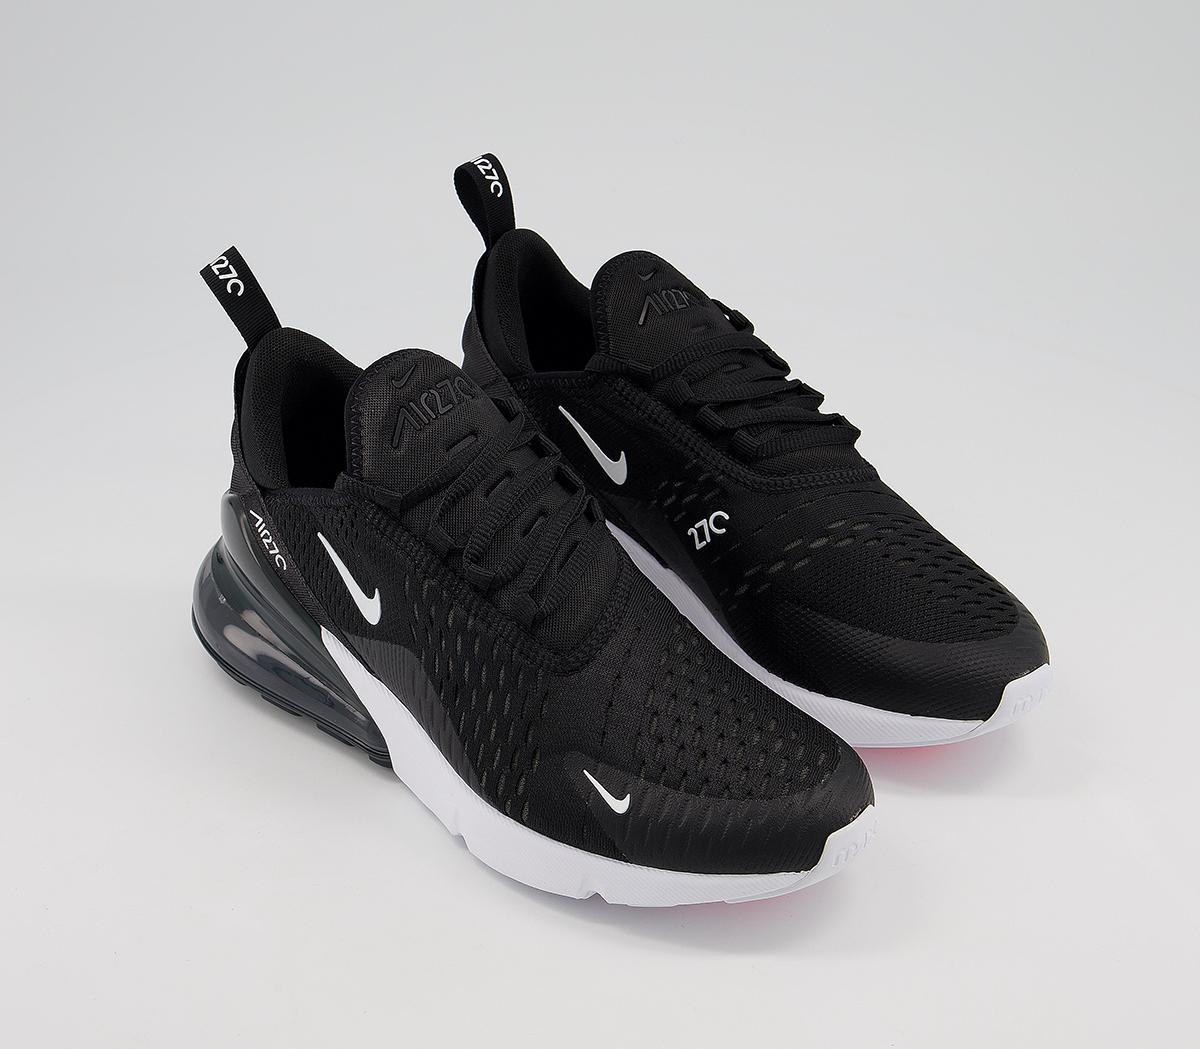 Nike Air Max 270 Trainers Black White - His trainers